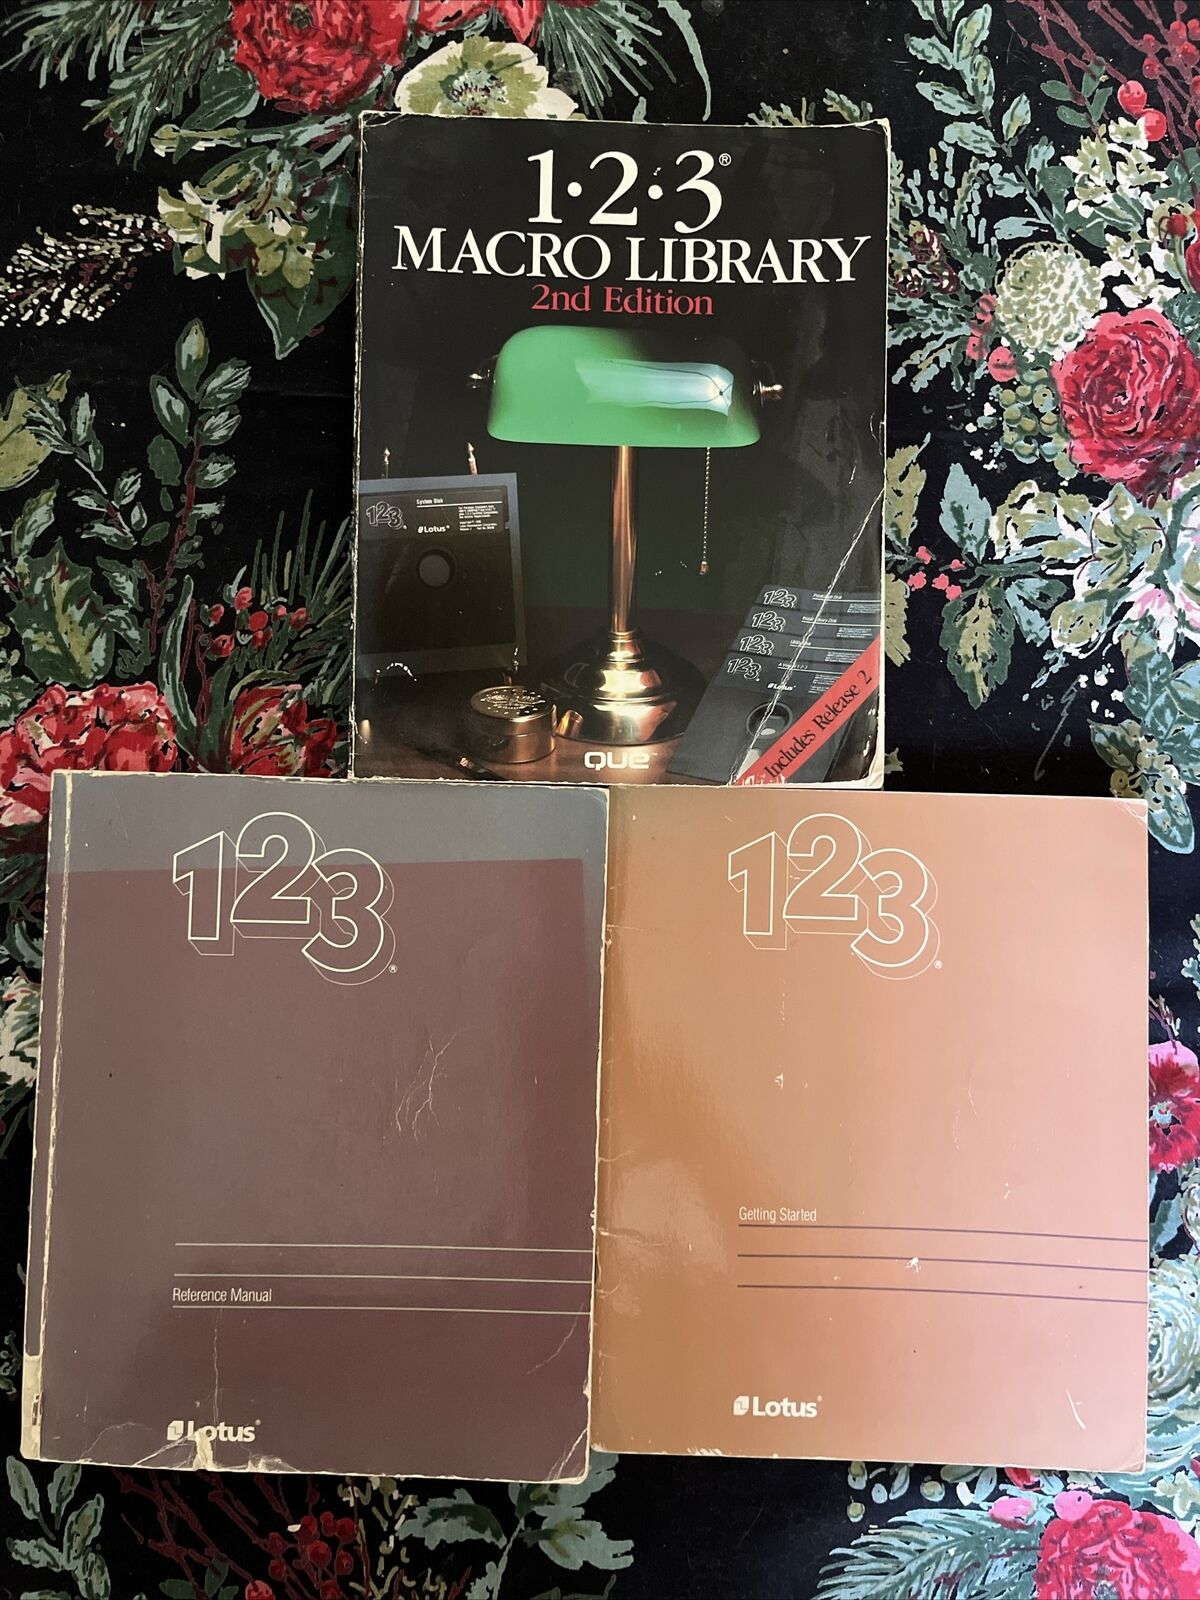 Lotus 123 Reference Manual Release Getting Started Macro Library 2nd Edition Lot